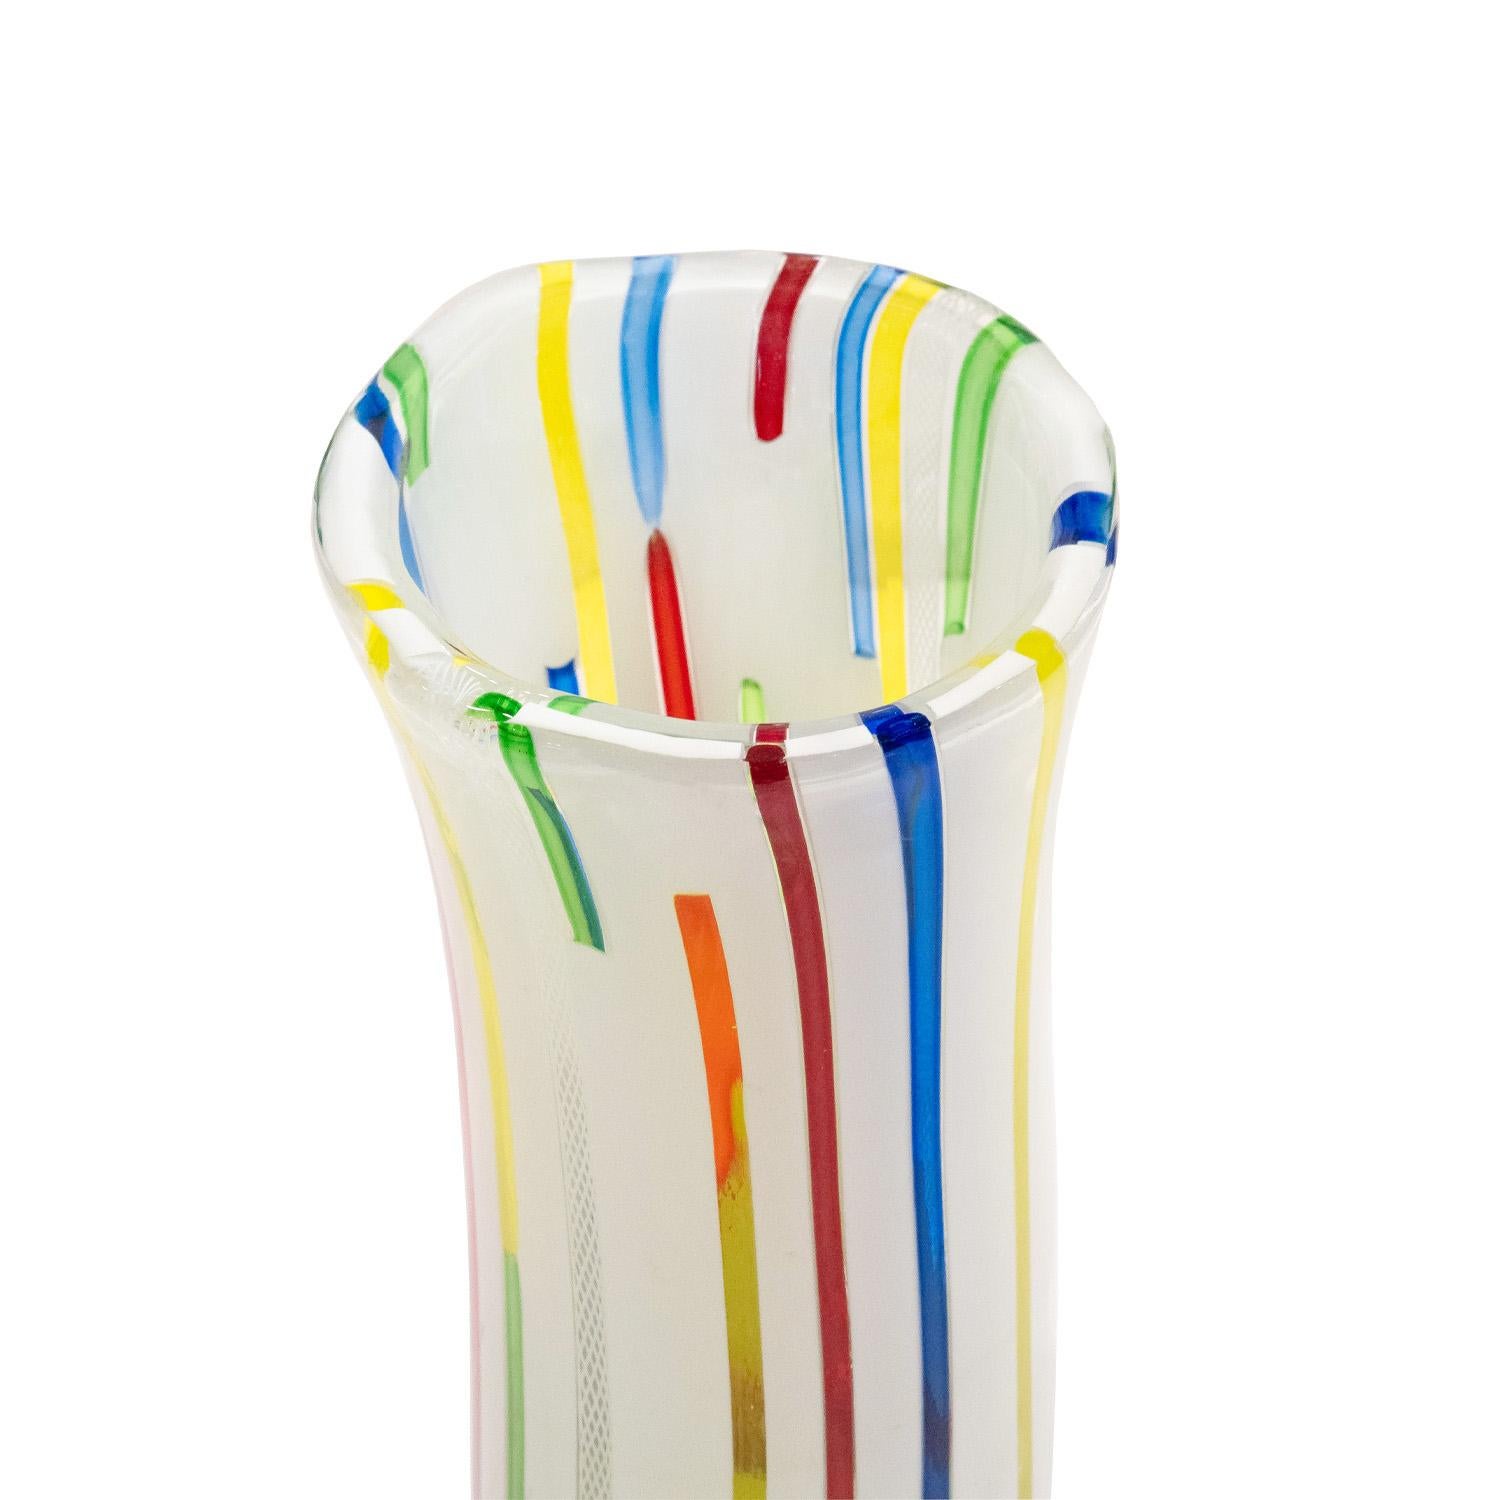 Mid-20th Century Anzolo Fuga Vase with Vertical Rods 1955-56 For Sale